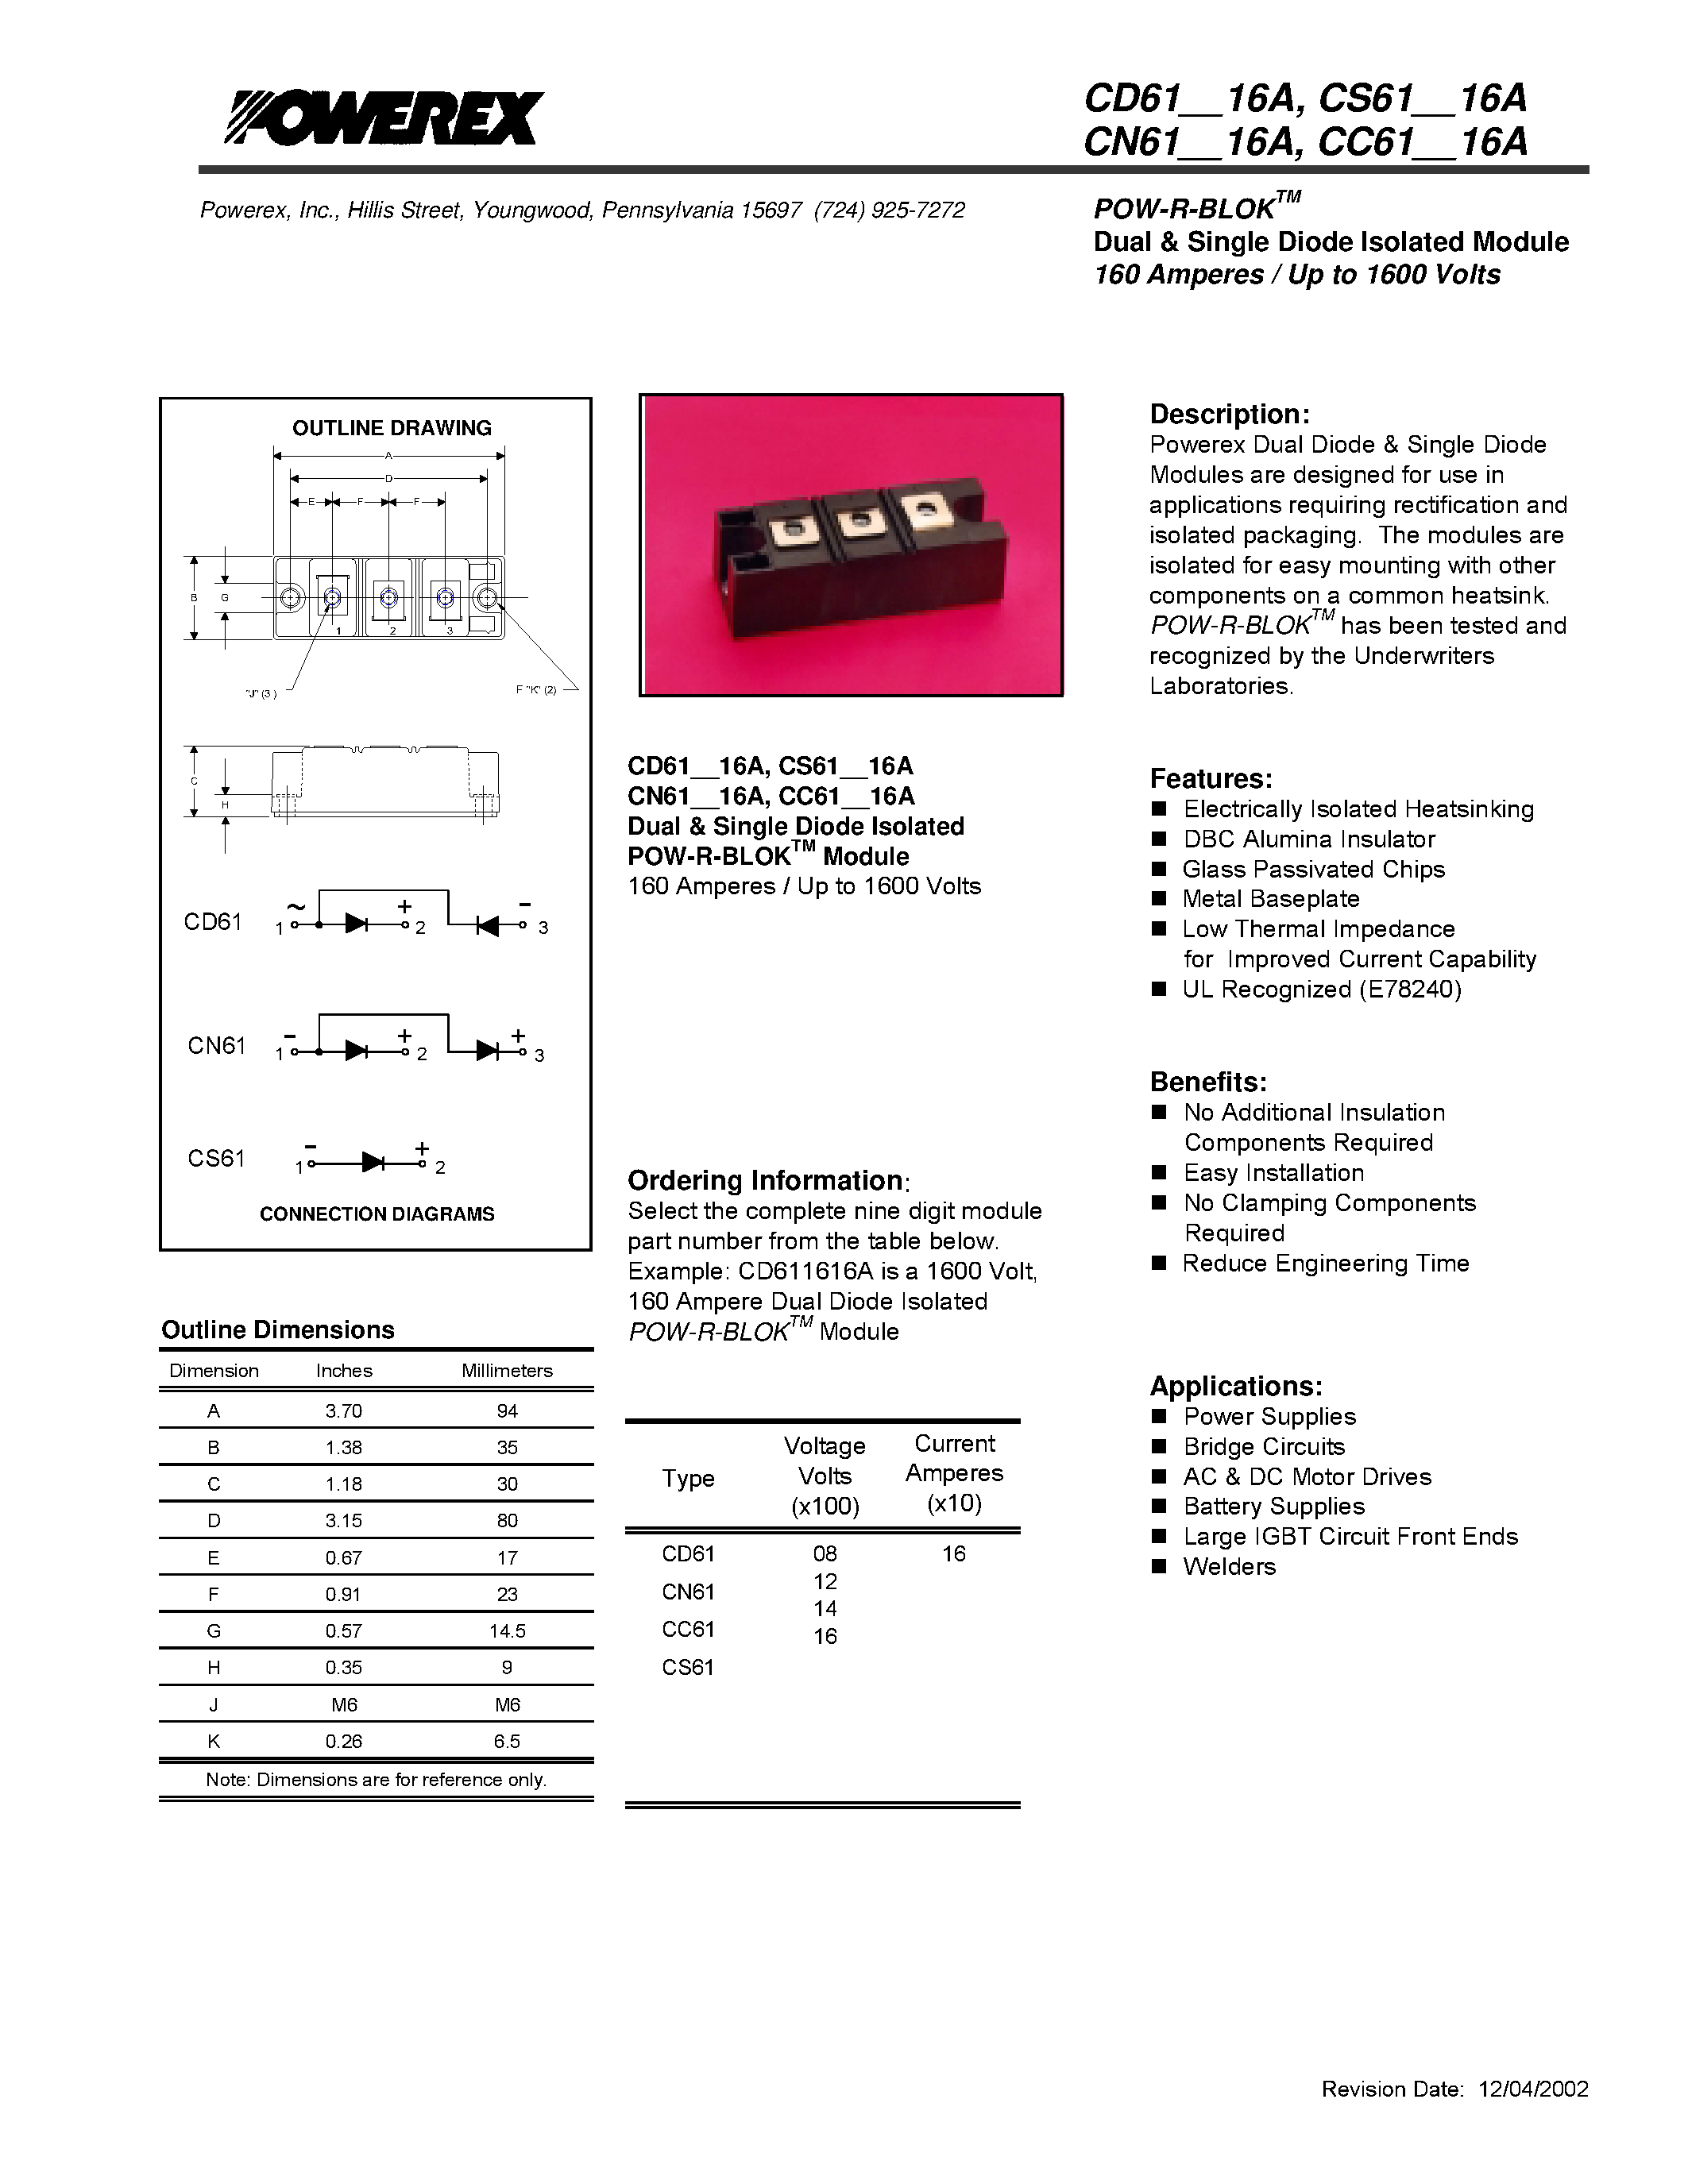 Datasheet CD61 - POW-R-BLOK Dual & Single Diode Isolated Module 160 Amperes / Up to 1600 Volts page 1